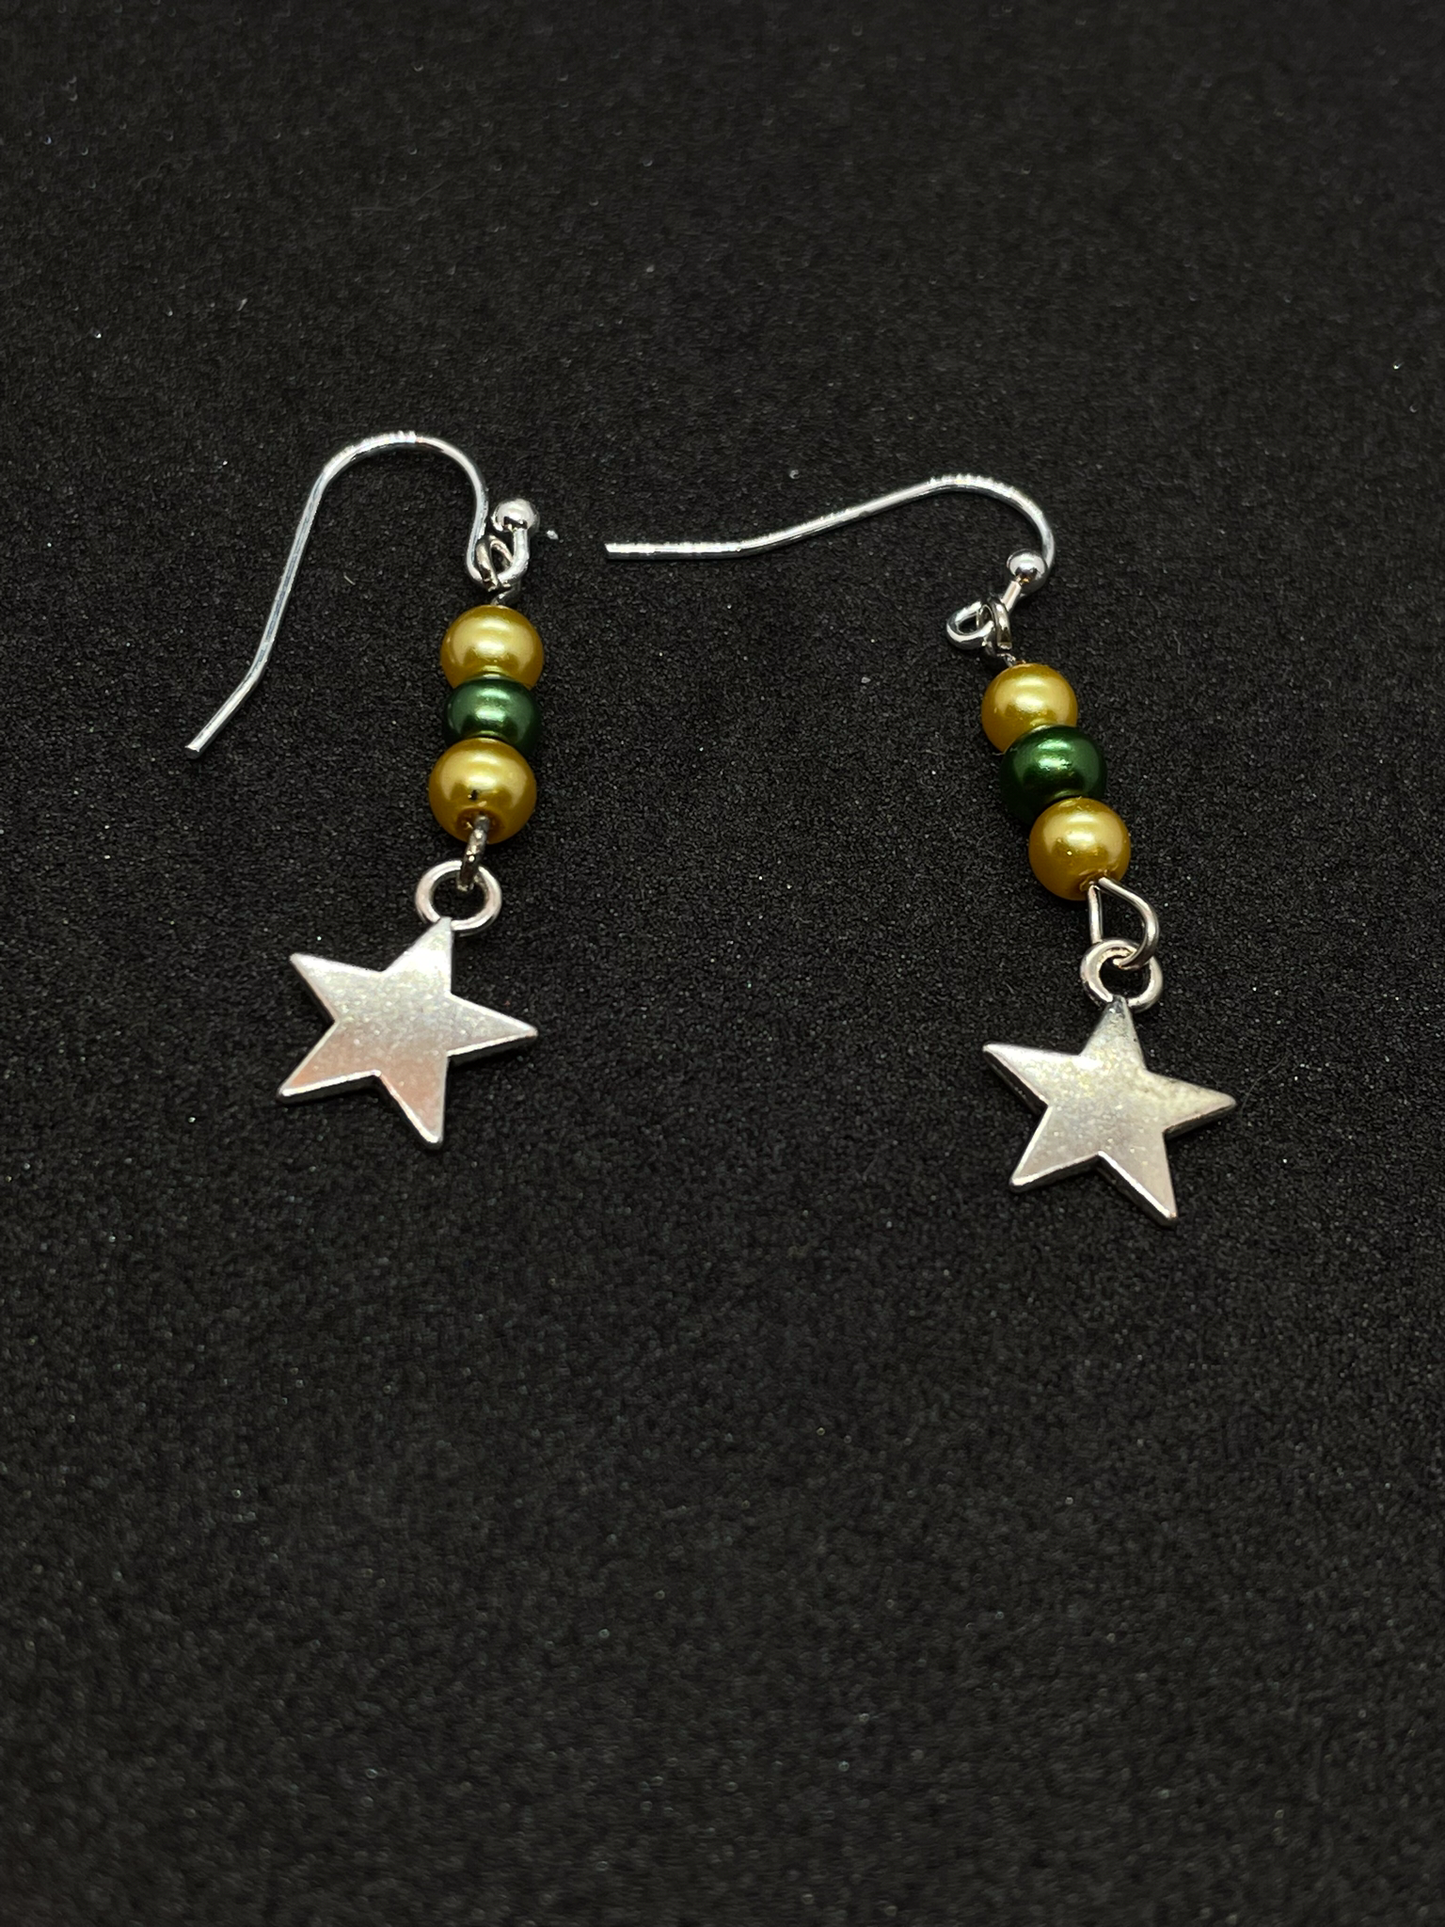 Festive drop earrings with beads and stars